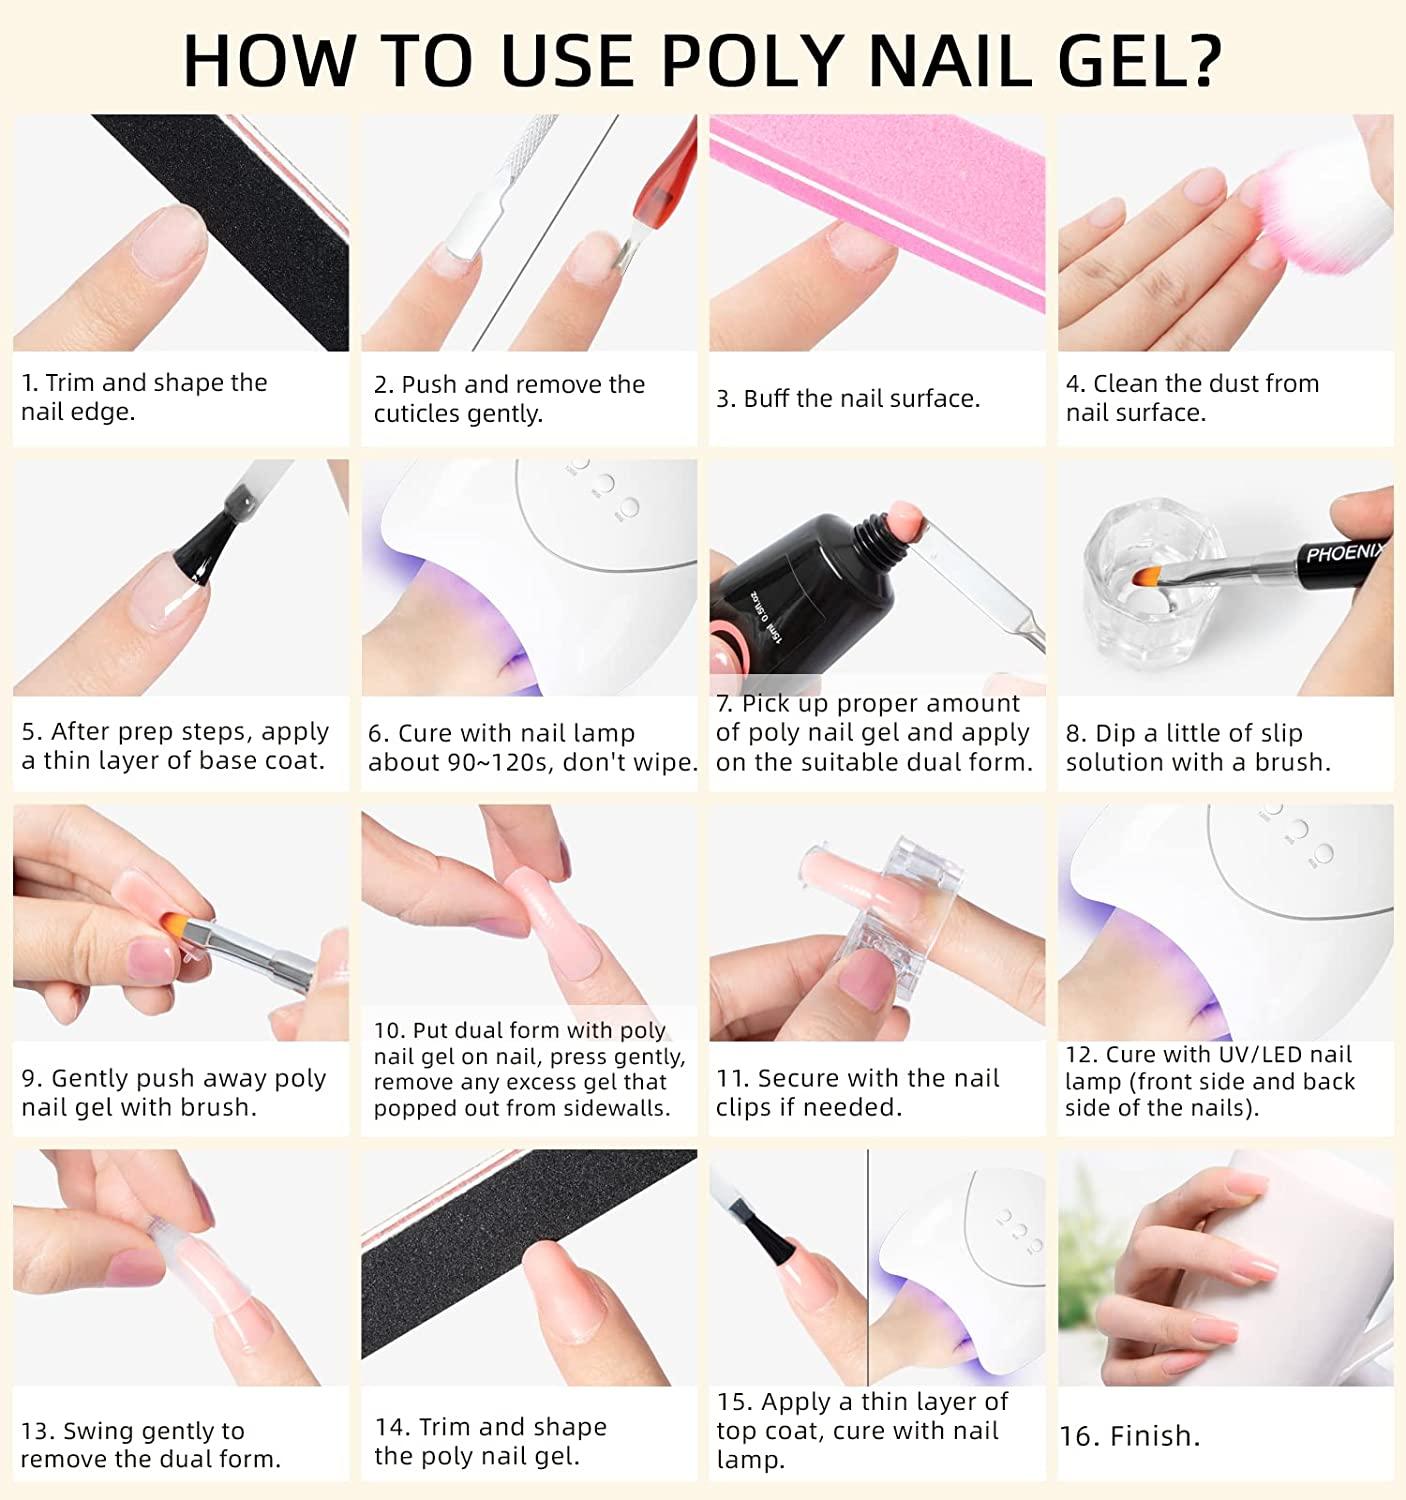 Poly Nail Gel Kit, Phoenixy 6 Colors Poly Nail Extension Gel Kit with 36W LED  U V Nail Lamp Basic Nail Art Tools All In One Manicure Starter Kit Gift  3GLITTER+3NUDE